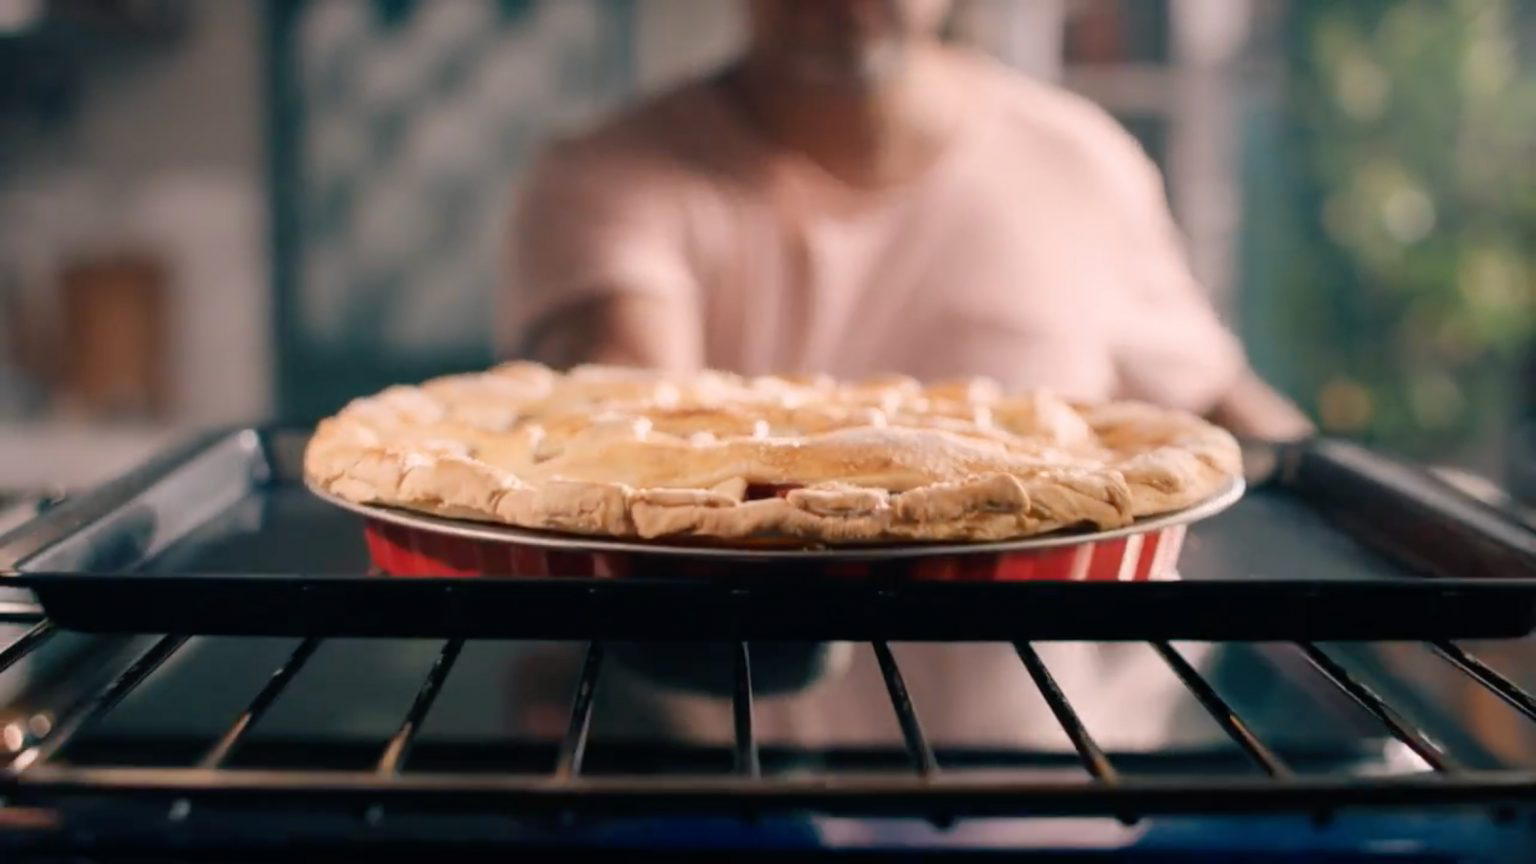 A person pulling out a pie from the oven.